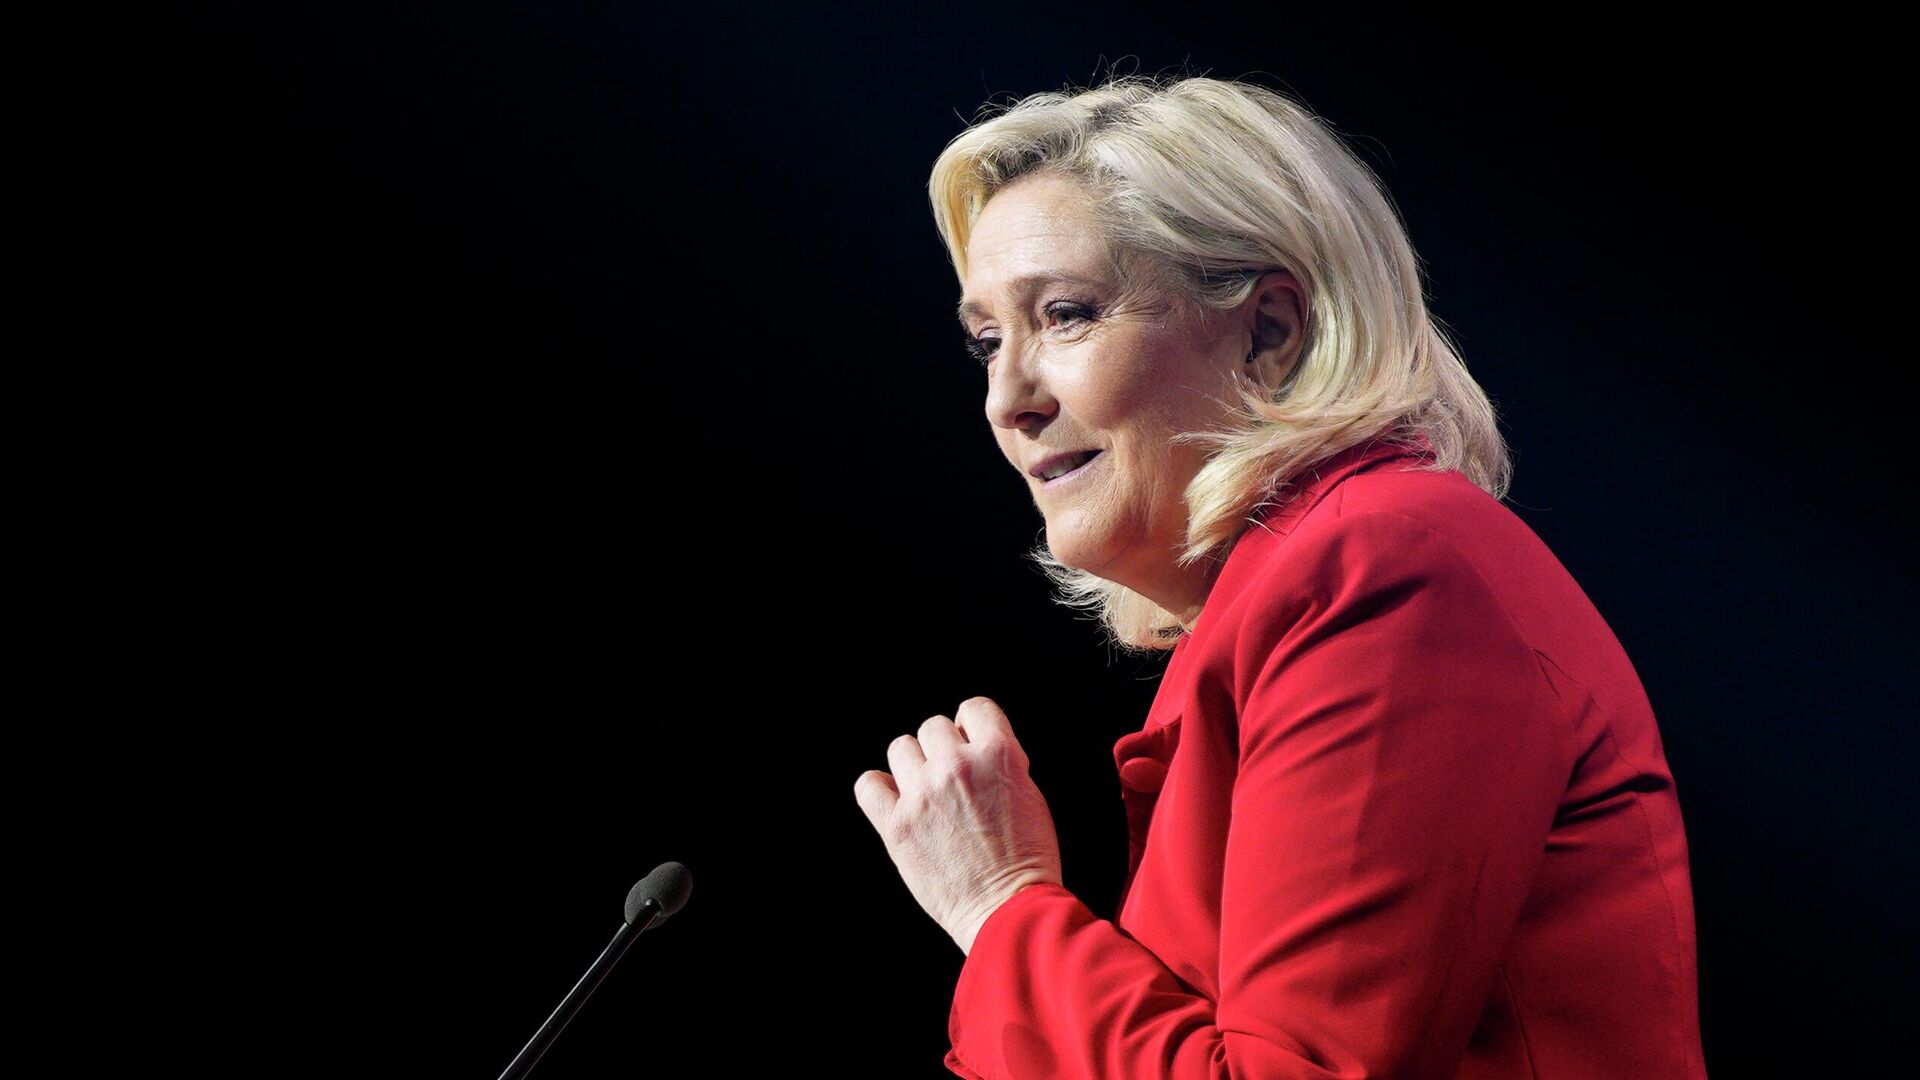 French right-wing politician Marine Le Pen delivers a speech during a meeting in Avignon, south of France, Thursday, April 14, 2022. Le Pen is trying to unseat centrist President Emmanuel Macron, who has a slim lead in polls ahead of France's April 24 presidential runoff election. (AP Photo/Daniel Cole) - Sputnik International, 1920, 20.03.2023